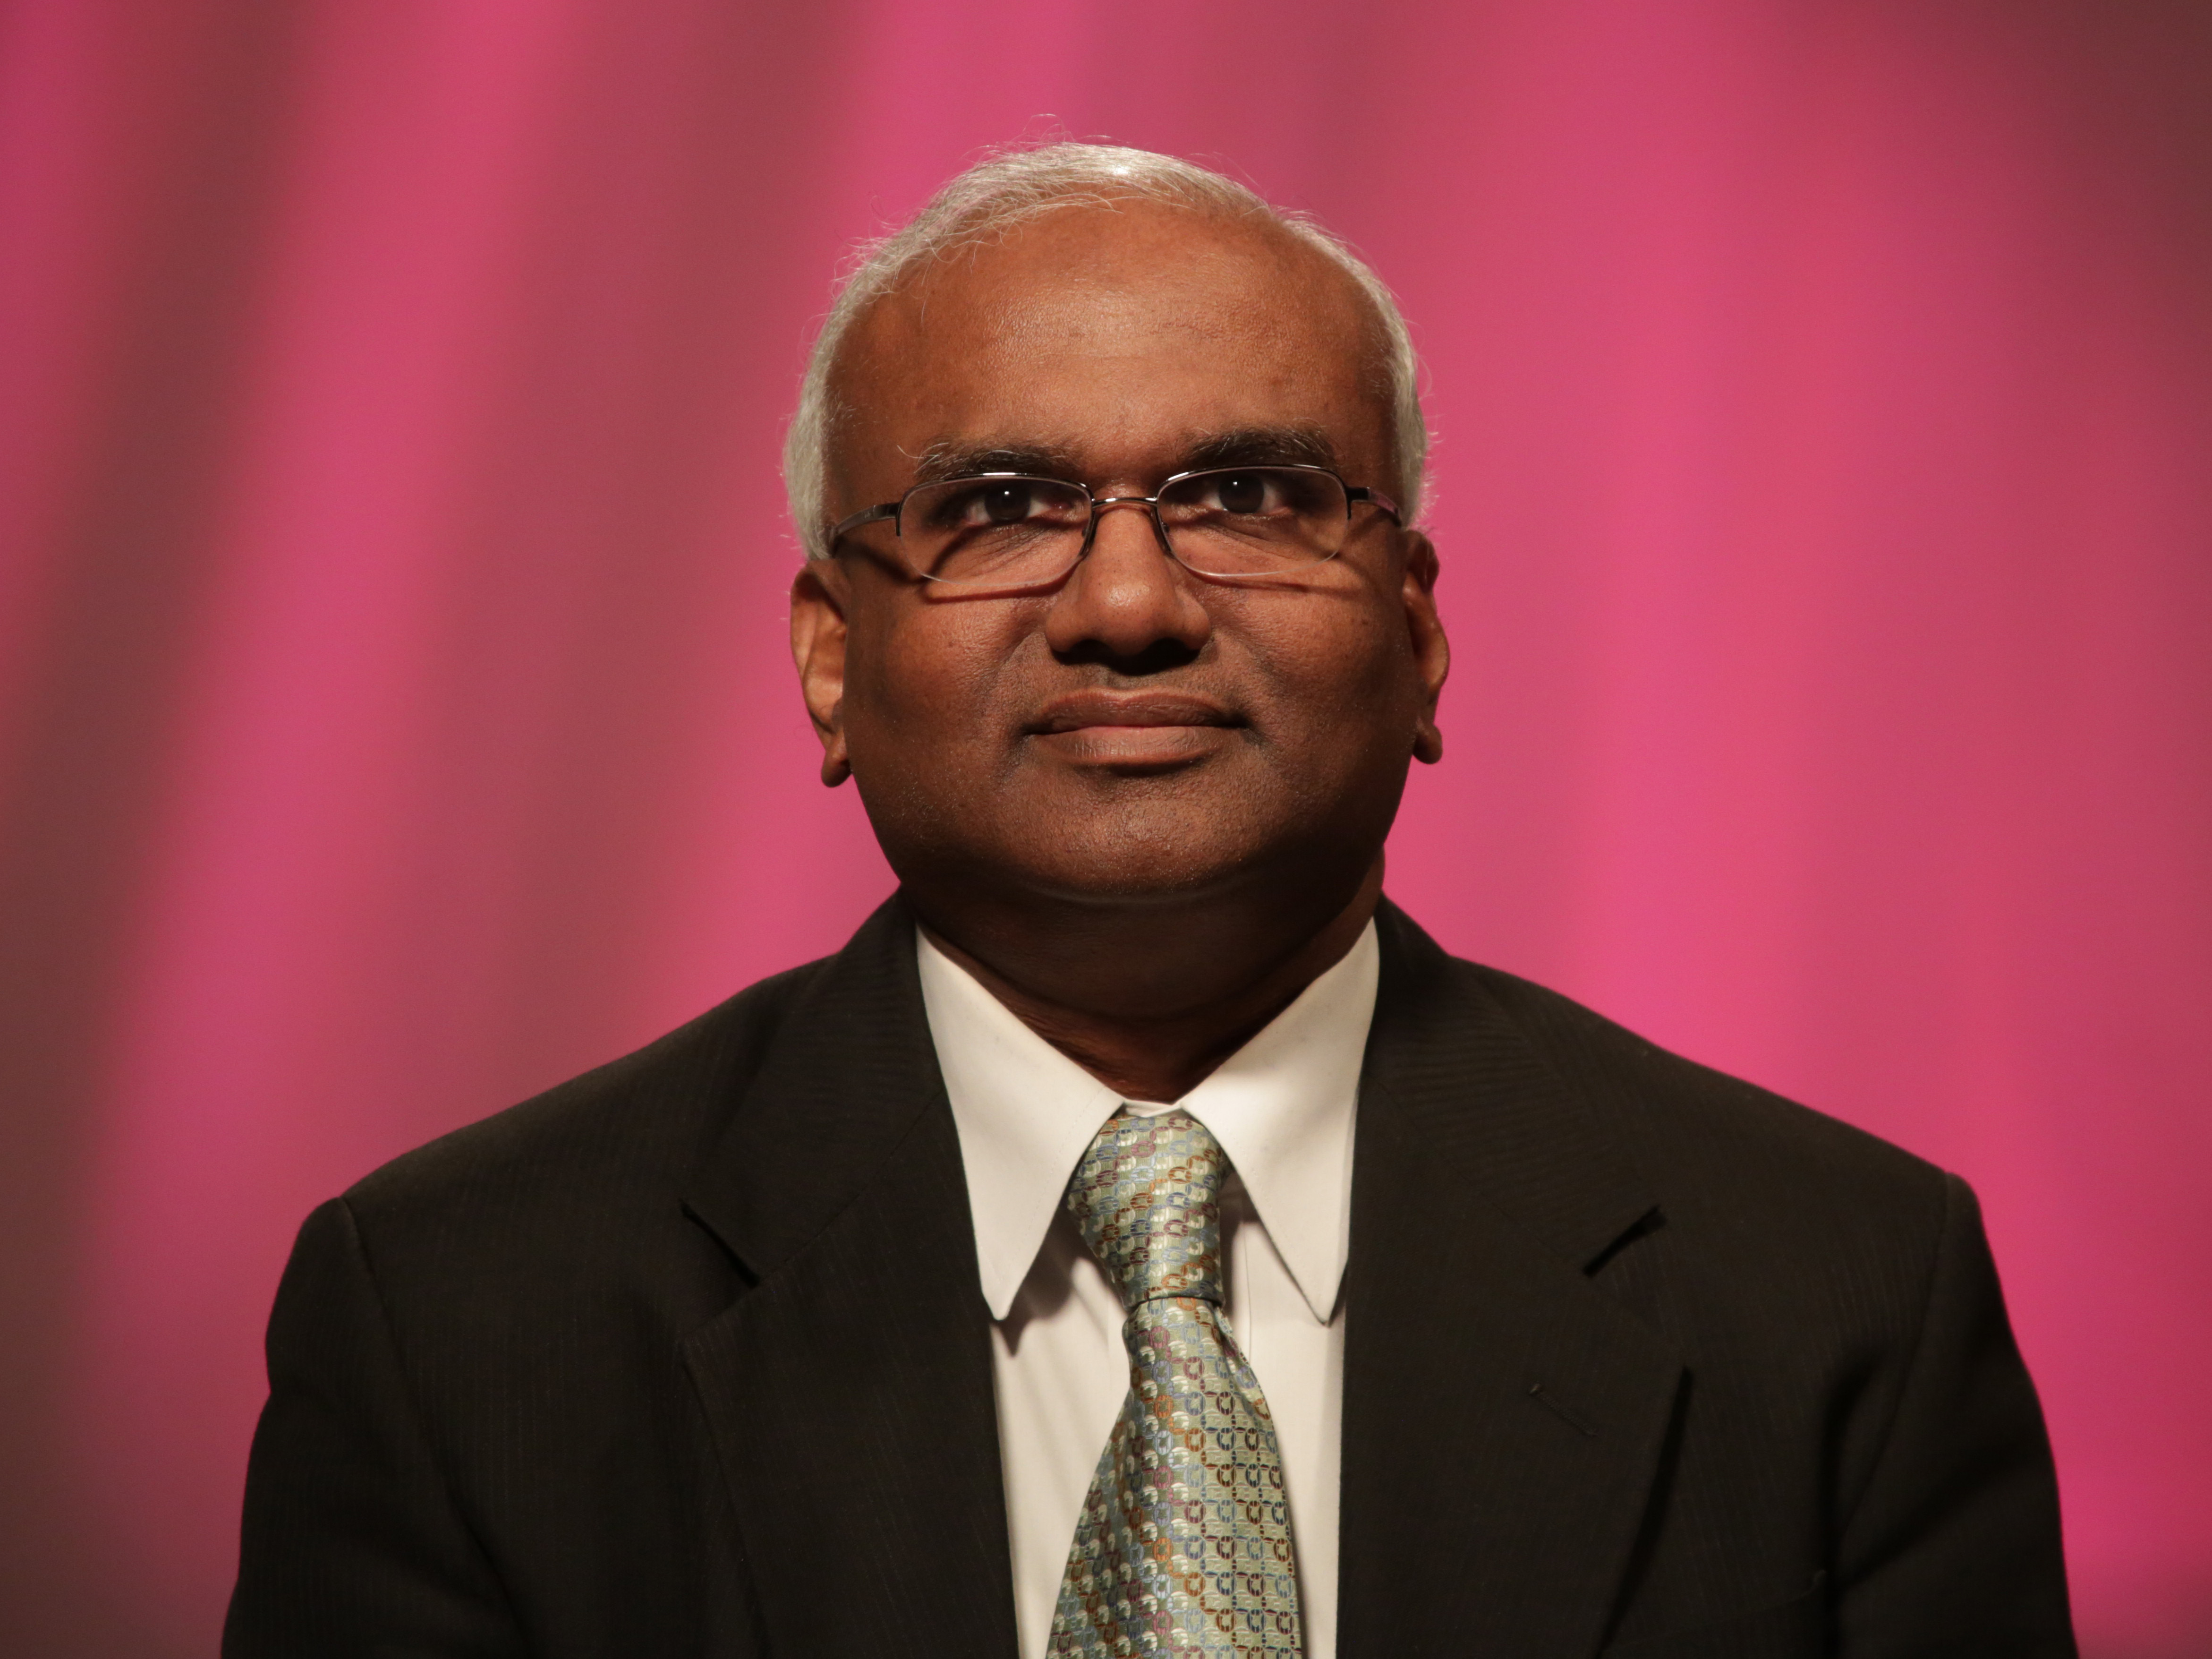 Moses Kumar, top executive of the General Council on Finance and Administration. 2012 file photo by Ronny Perry, UMNS